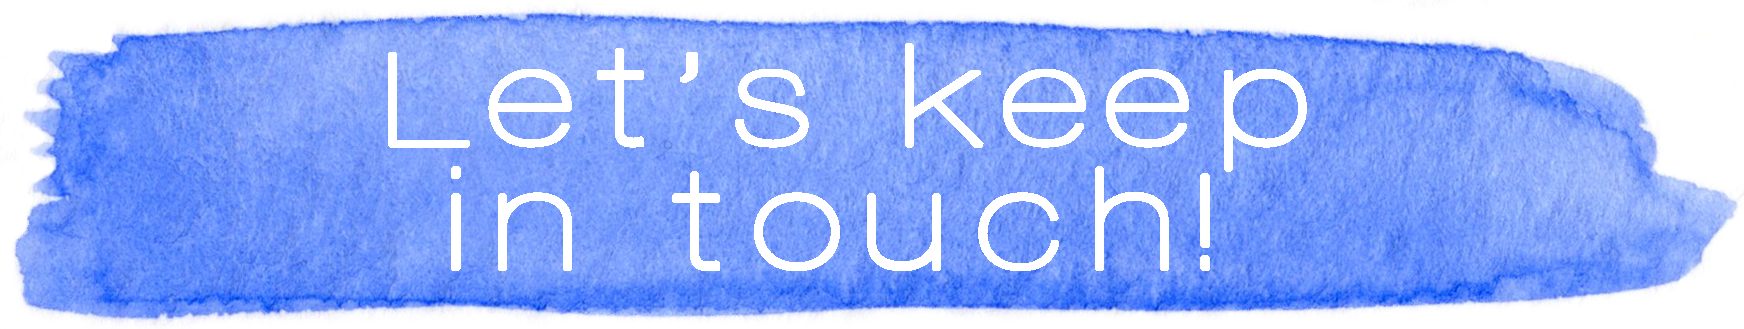 Let's Keep In Touch Header Image